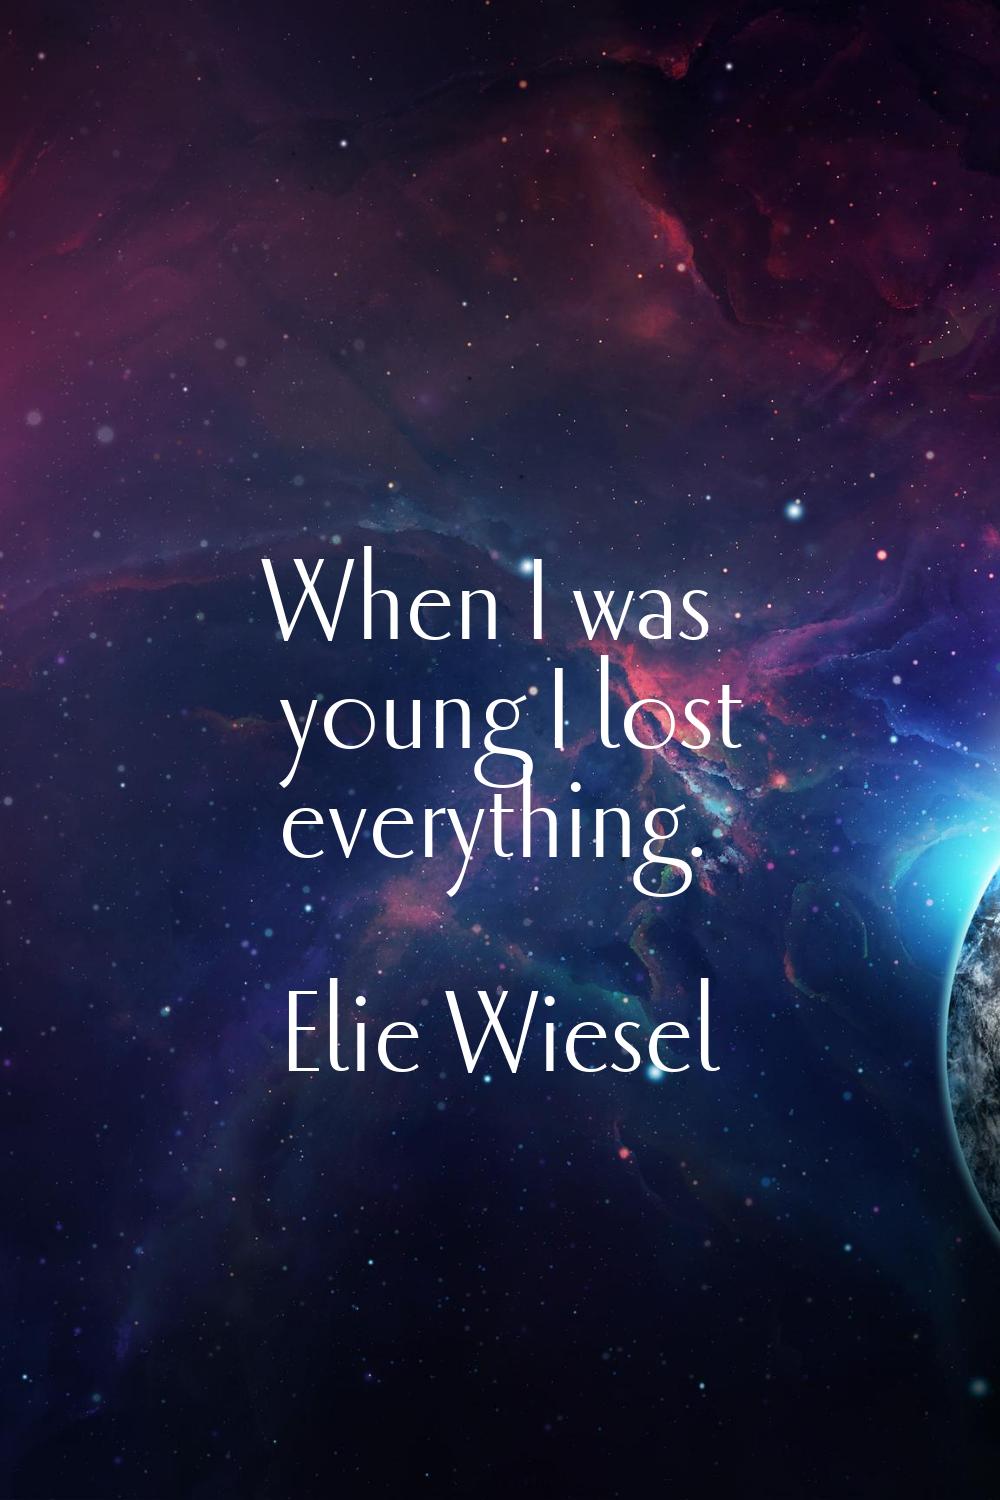 When I was young I lost everything.